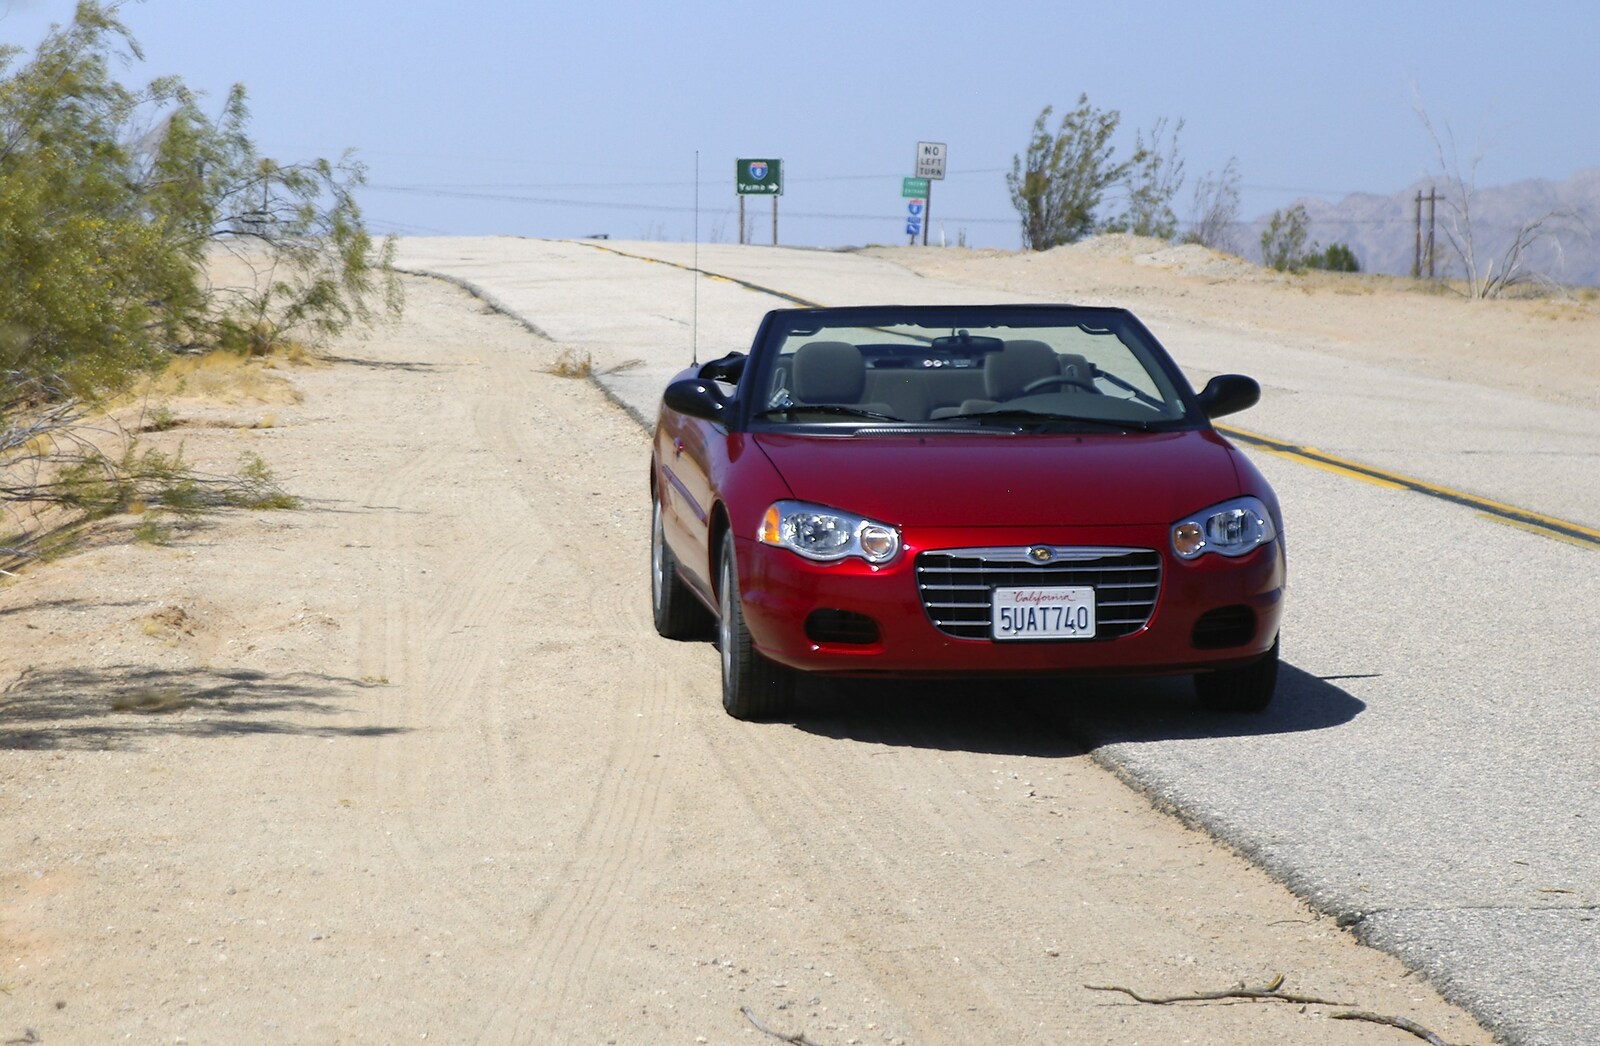 The Chrysler Sebring from San Diego Seven: The Desert and the Dunes, Arizona and California, US - 22nd April